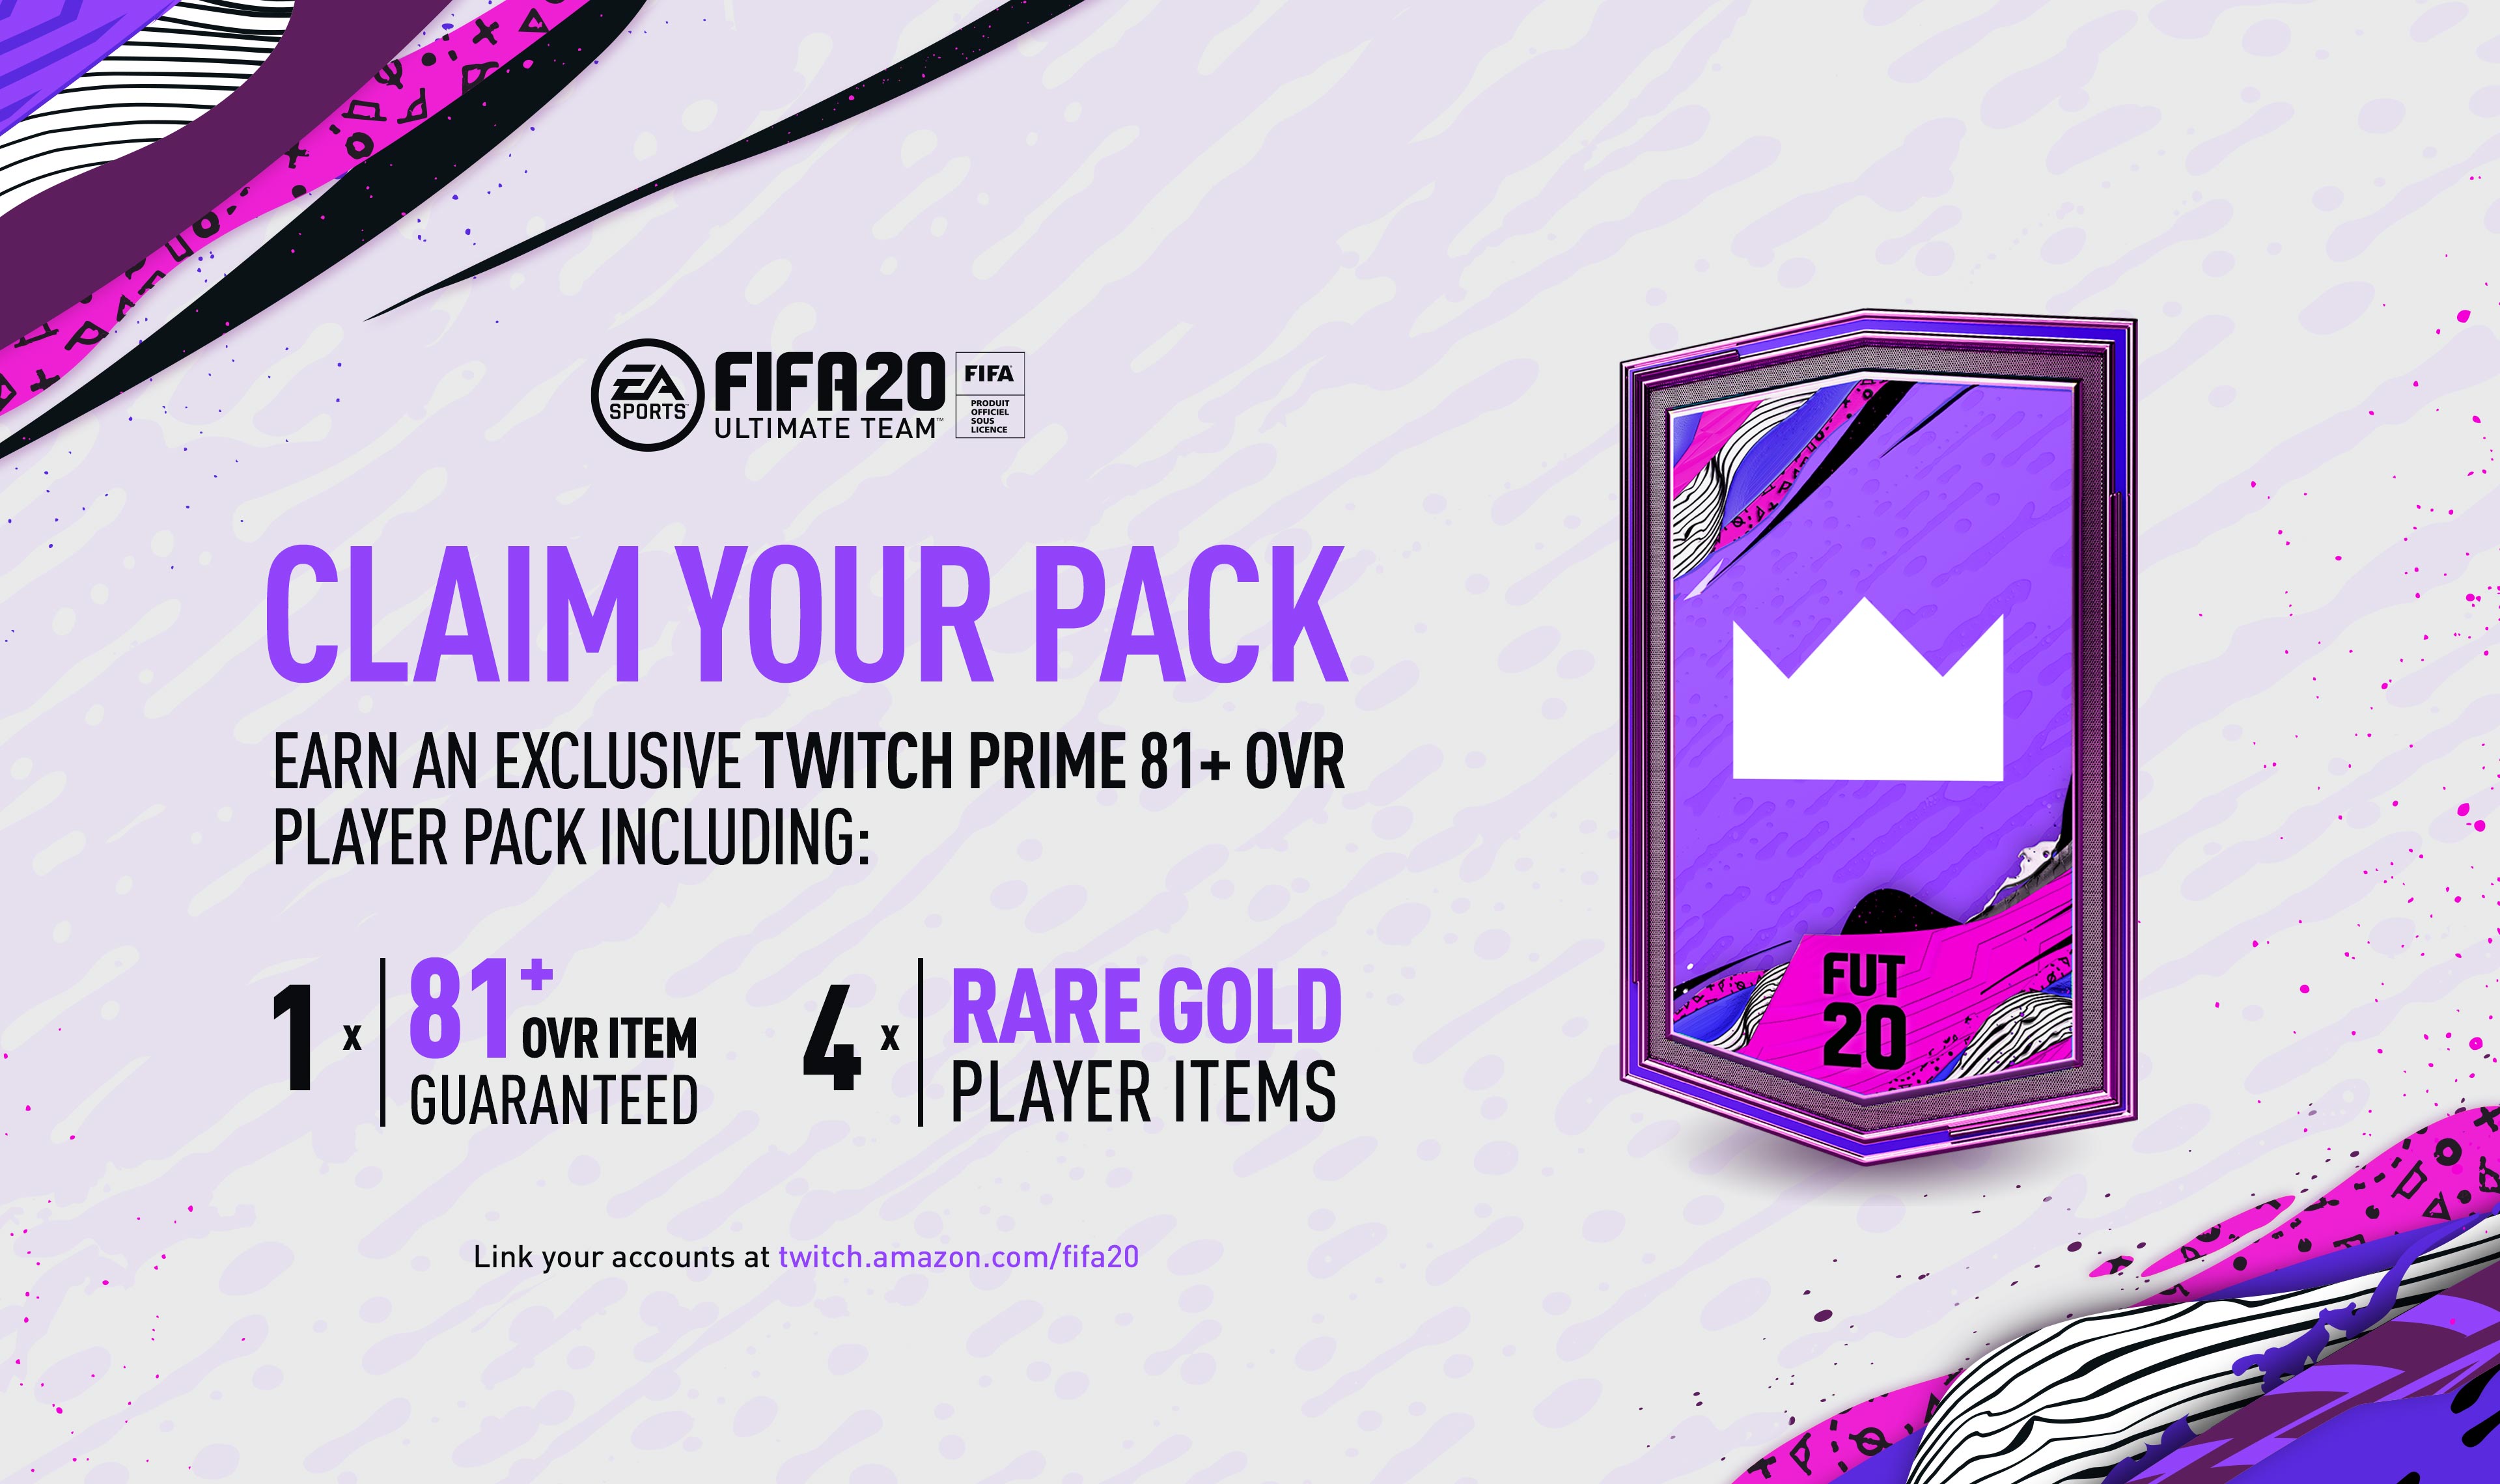 𝙁𝙐𝙏𝙒𝙄𝙕 on X: Looks like Twitch Prime Gaming pack #4 is